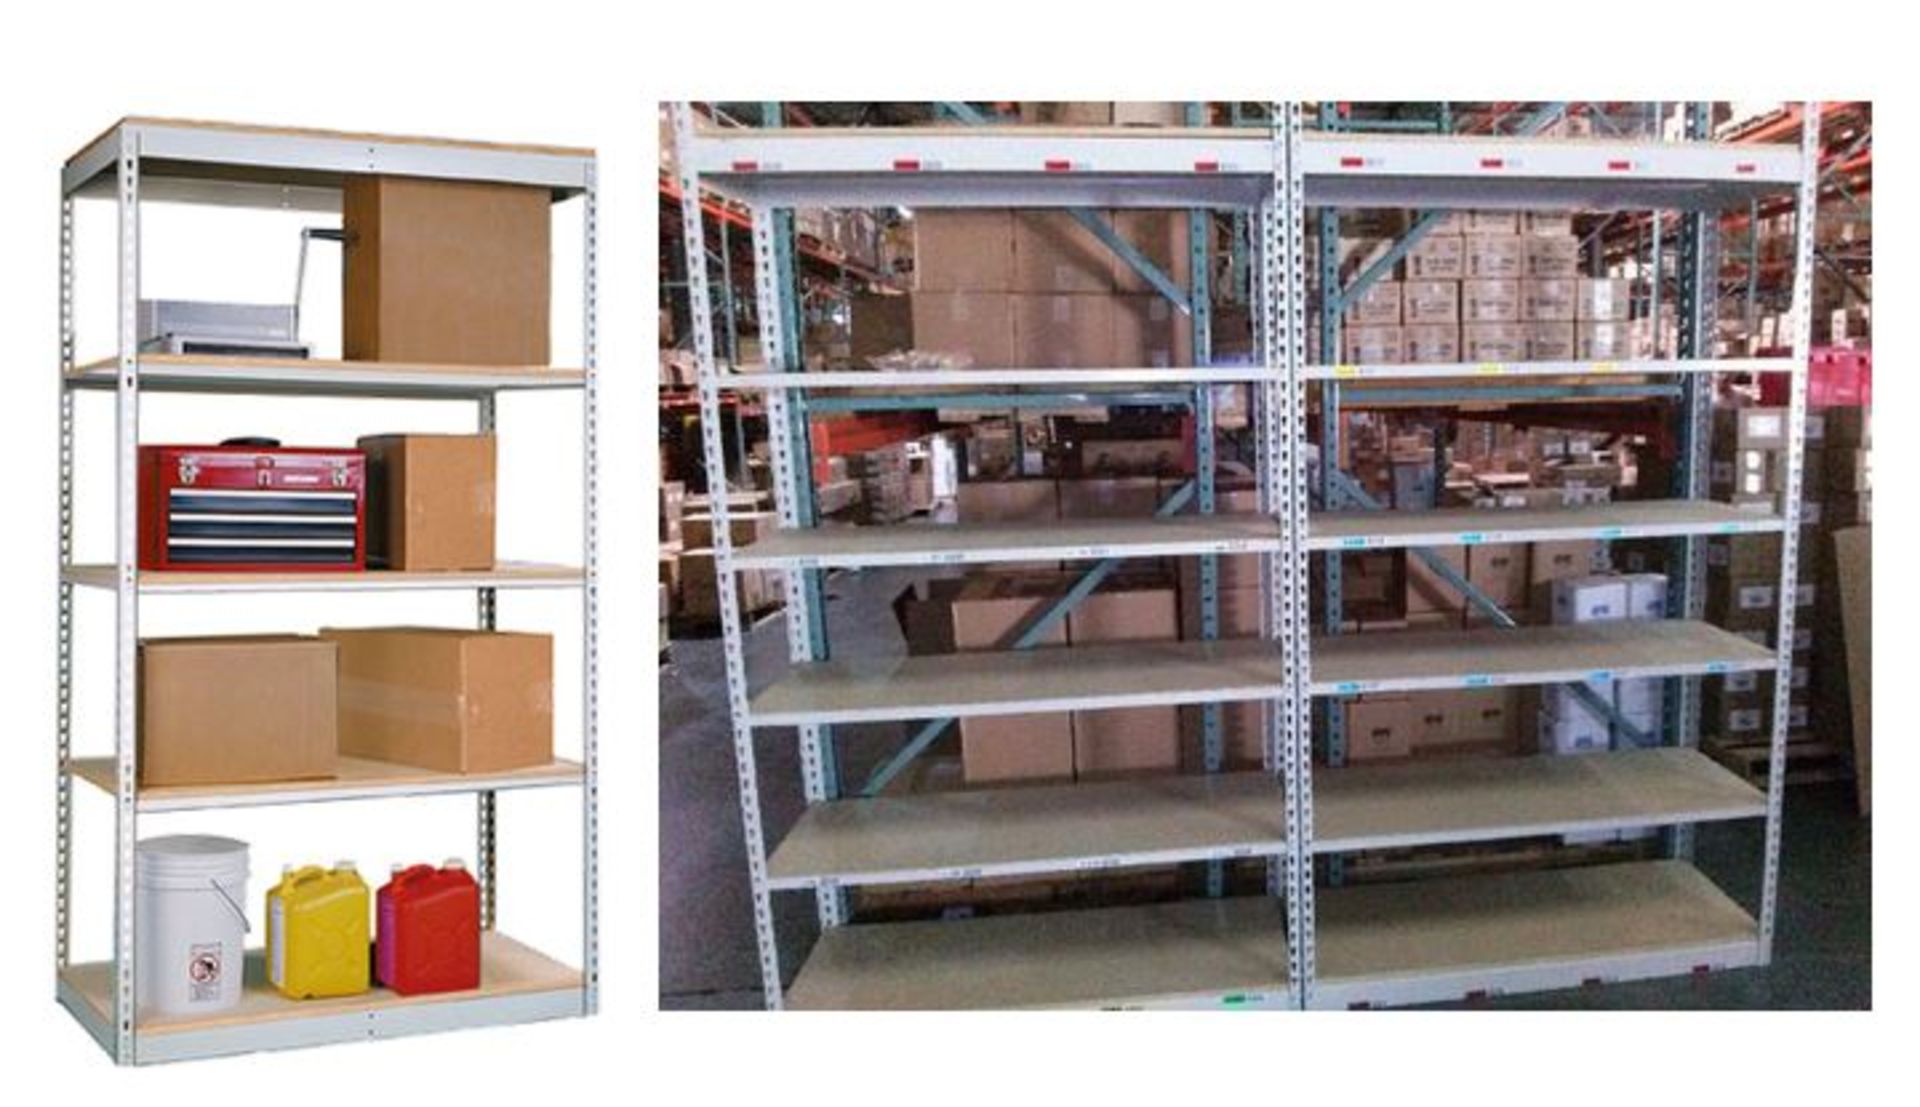 Truckload of Rivetier Shelving ,Size: 18"D X 48"W X 84"H, 385 sections Total